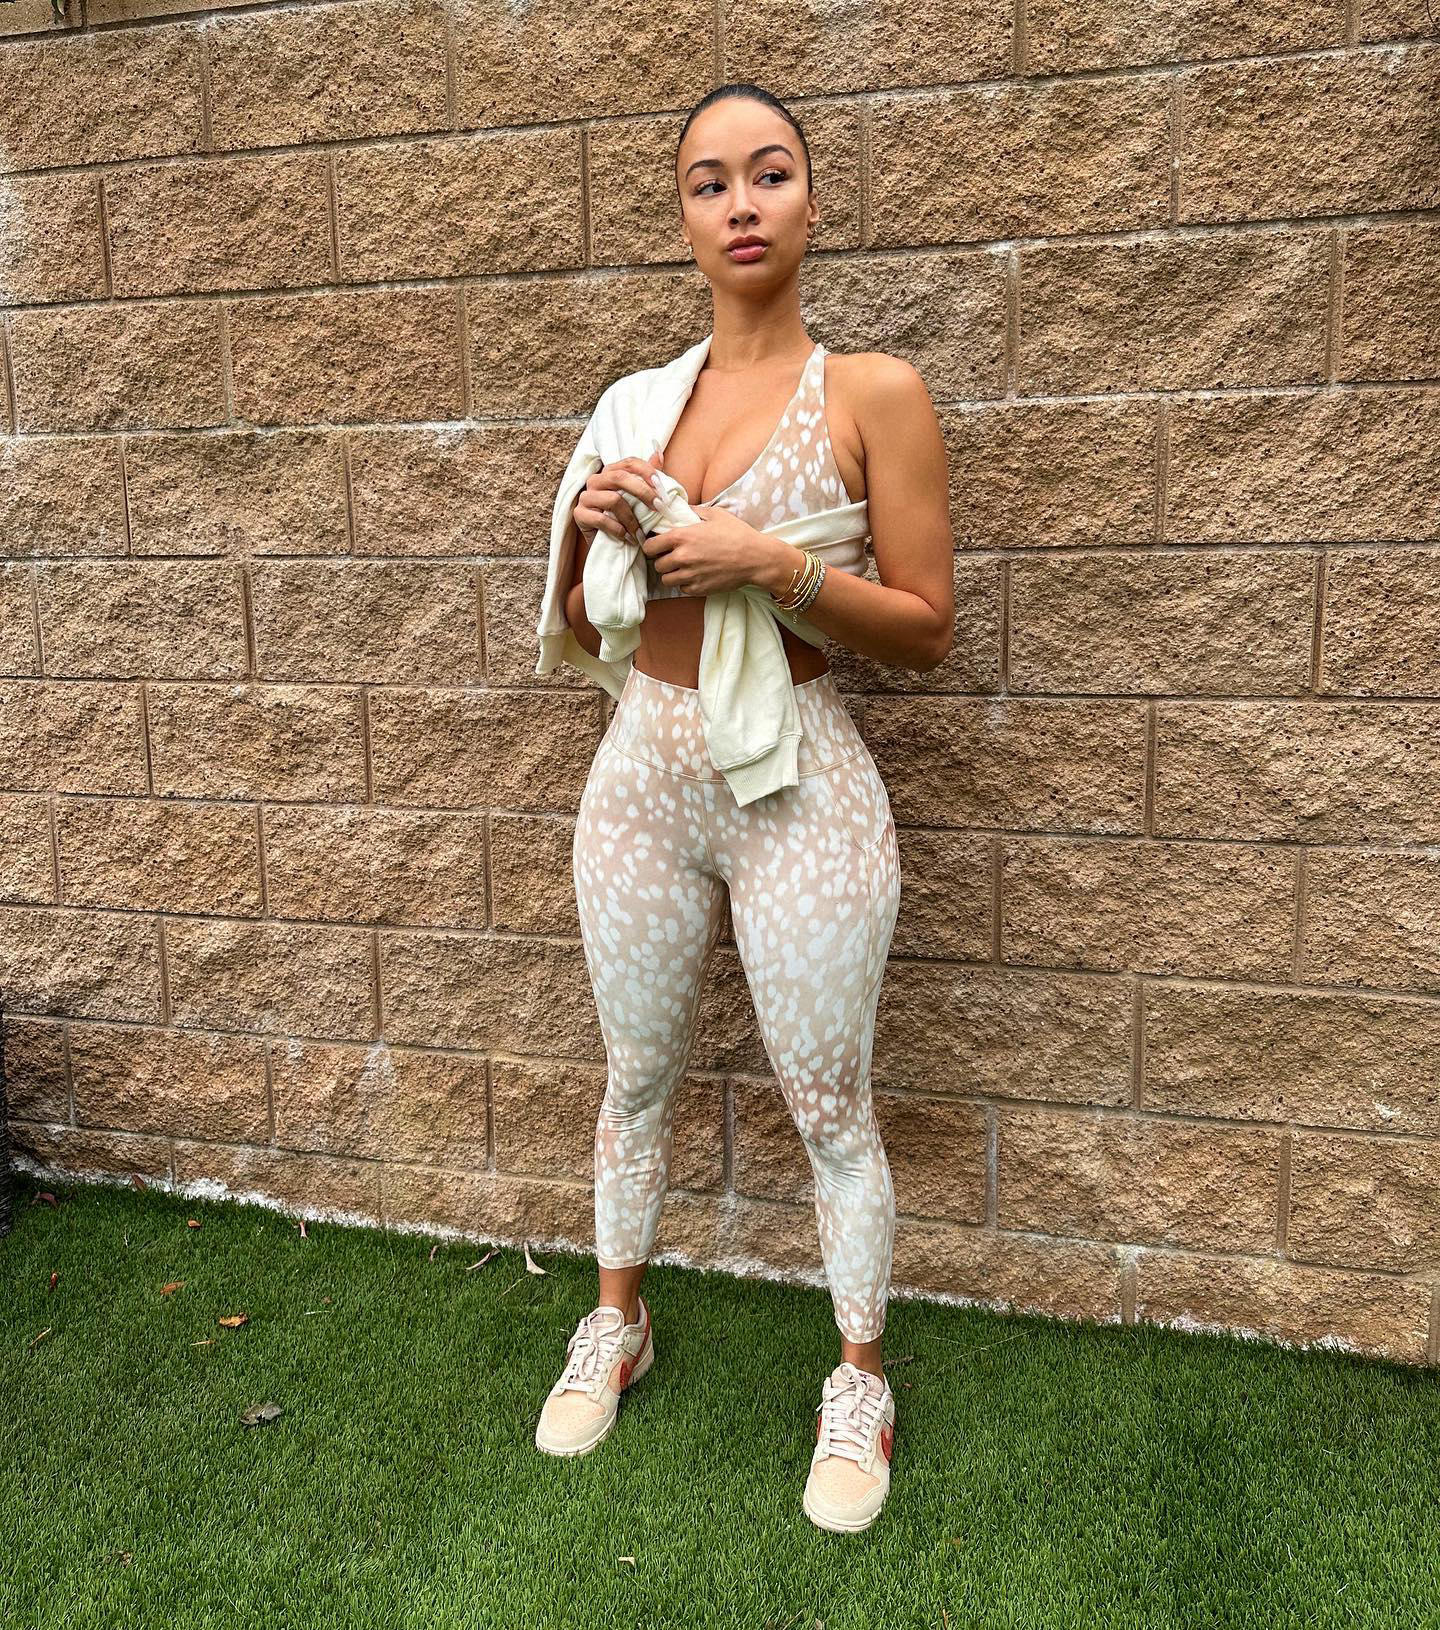 Draya Michele - What do you call this print